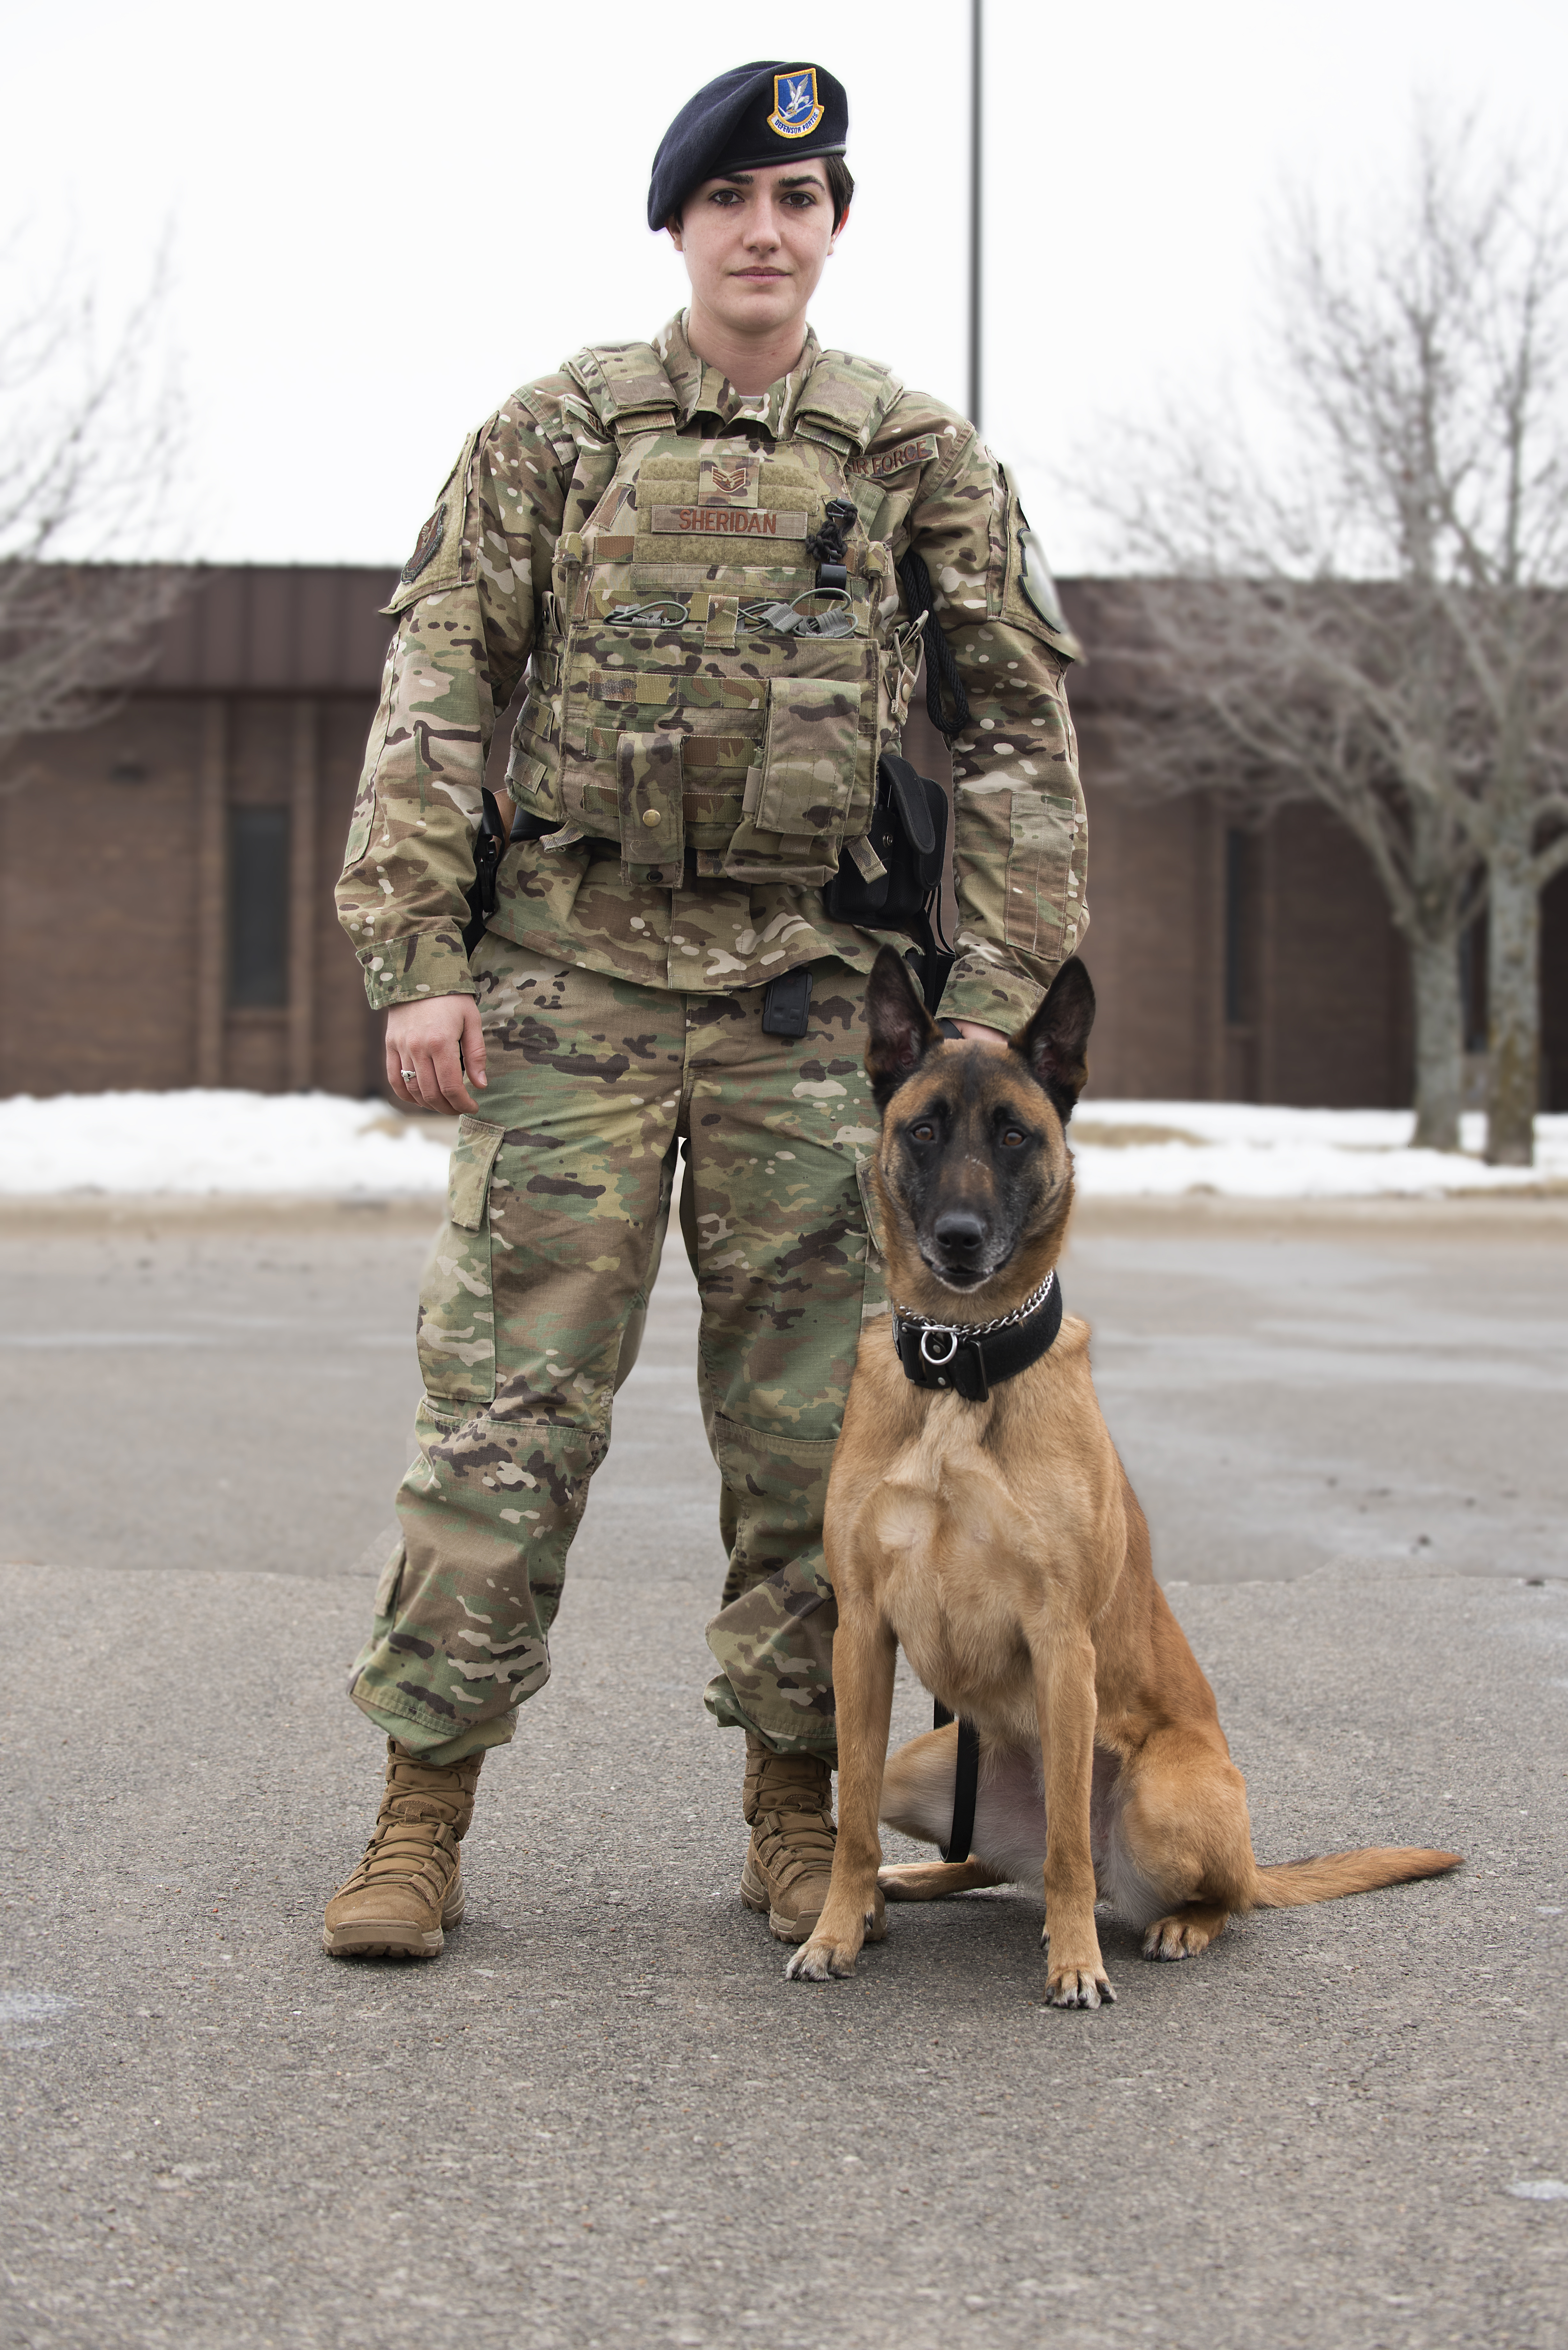 Staff Sgt. Nicolette Sheridan, the only female military working dog (MWD) handler stationed at Whiteman AFB, is partnered with 4-year-old MWD, Gucci. Together, they help ensure the safety of the base.